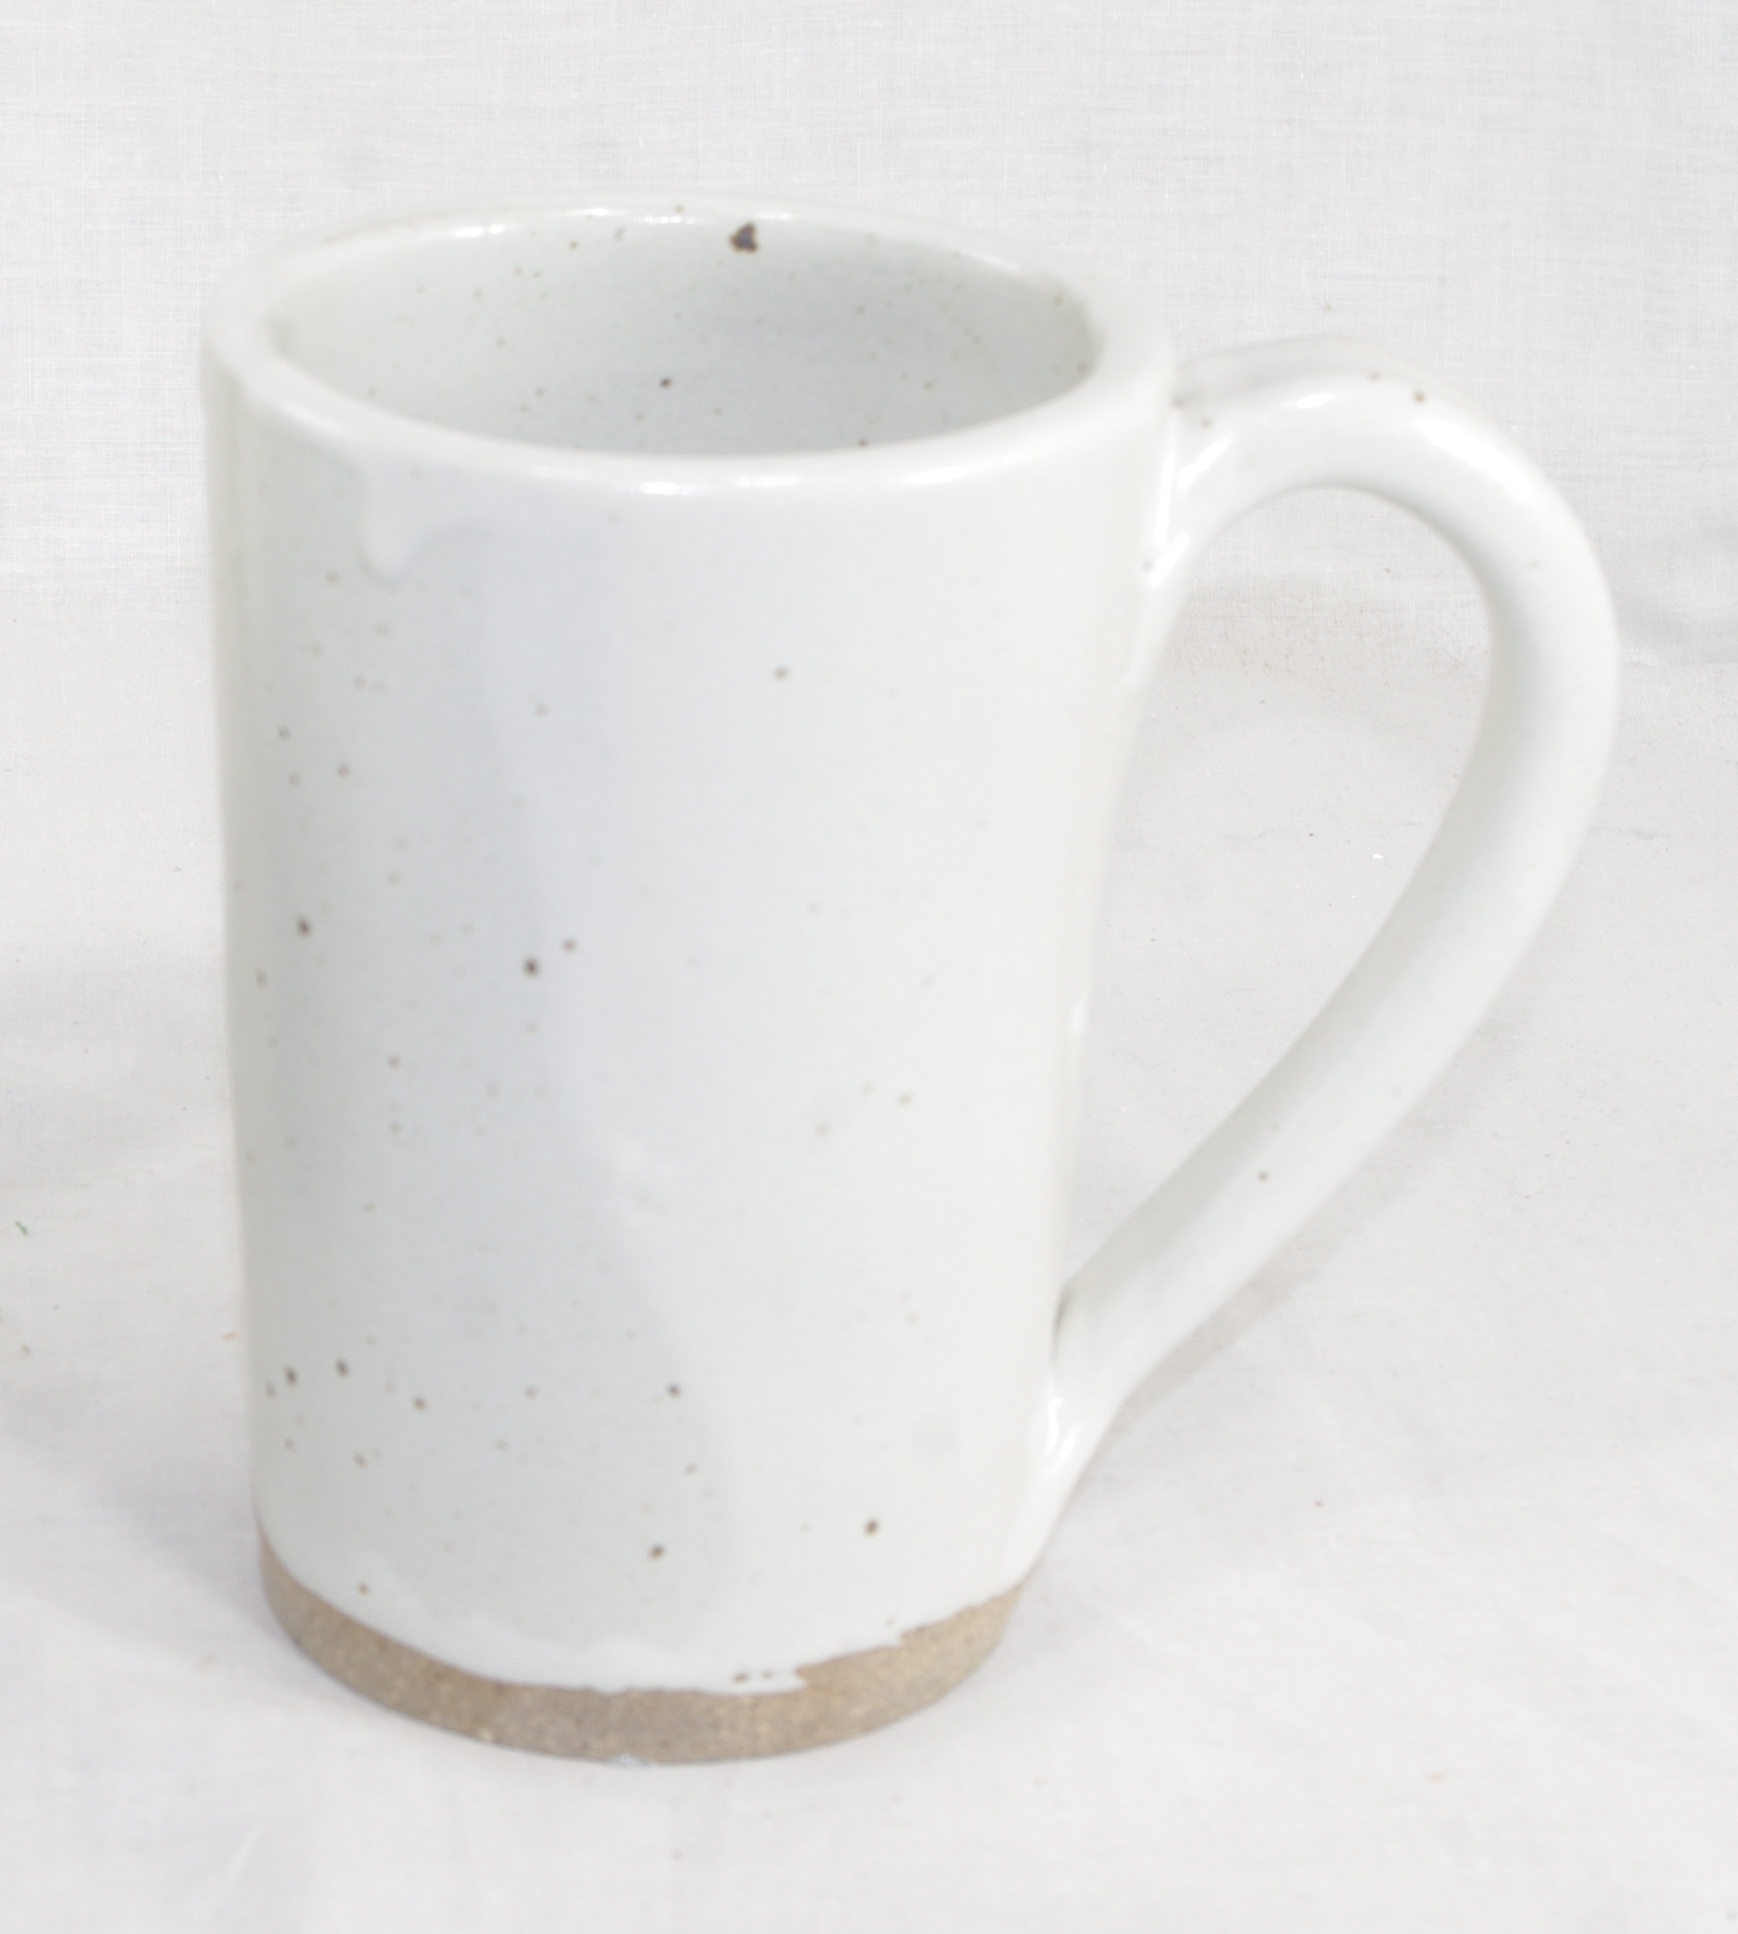 Large White Cup